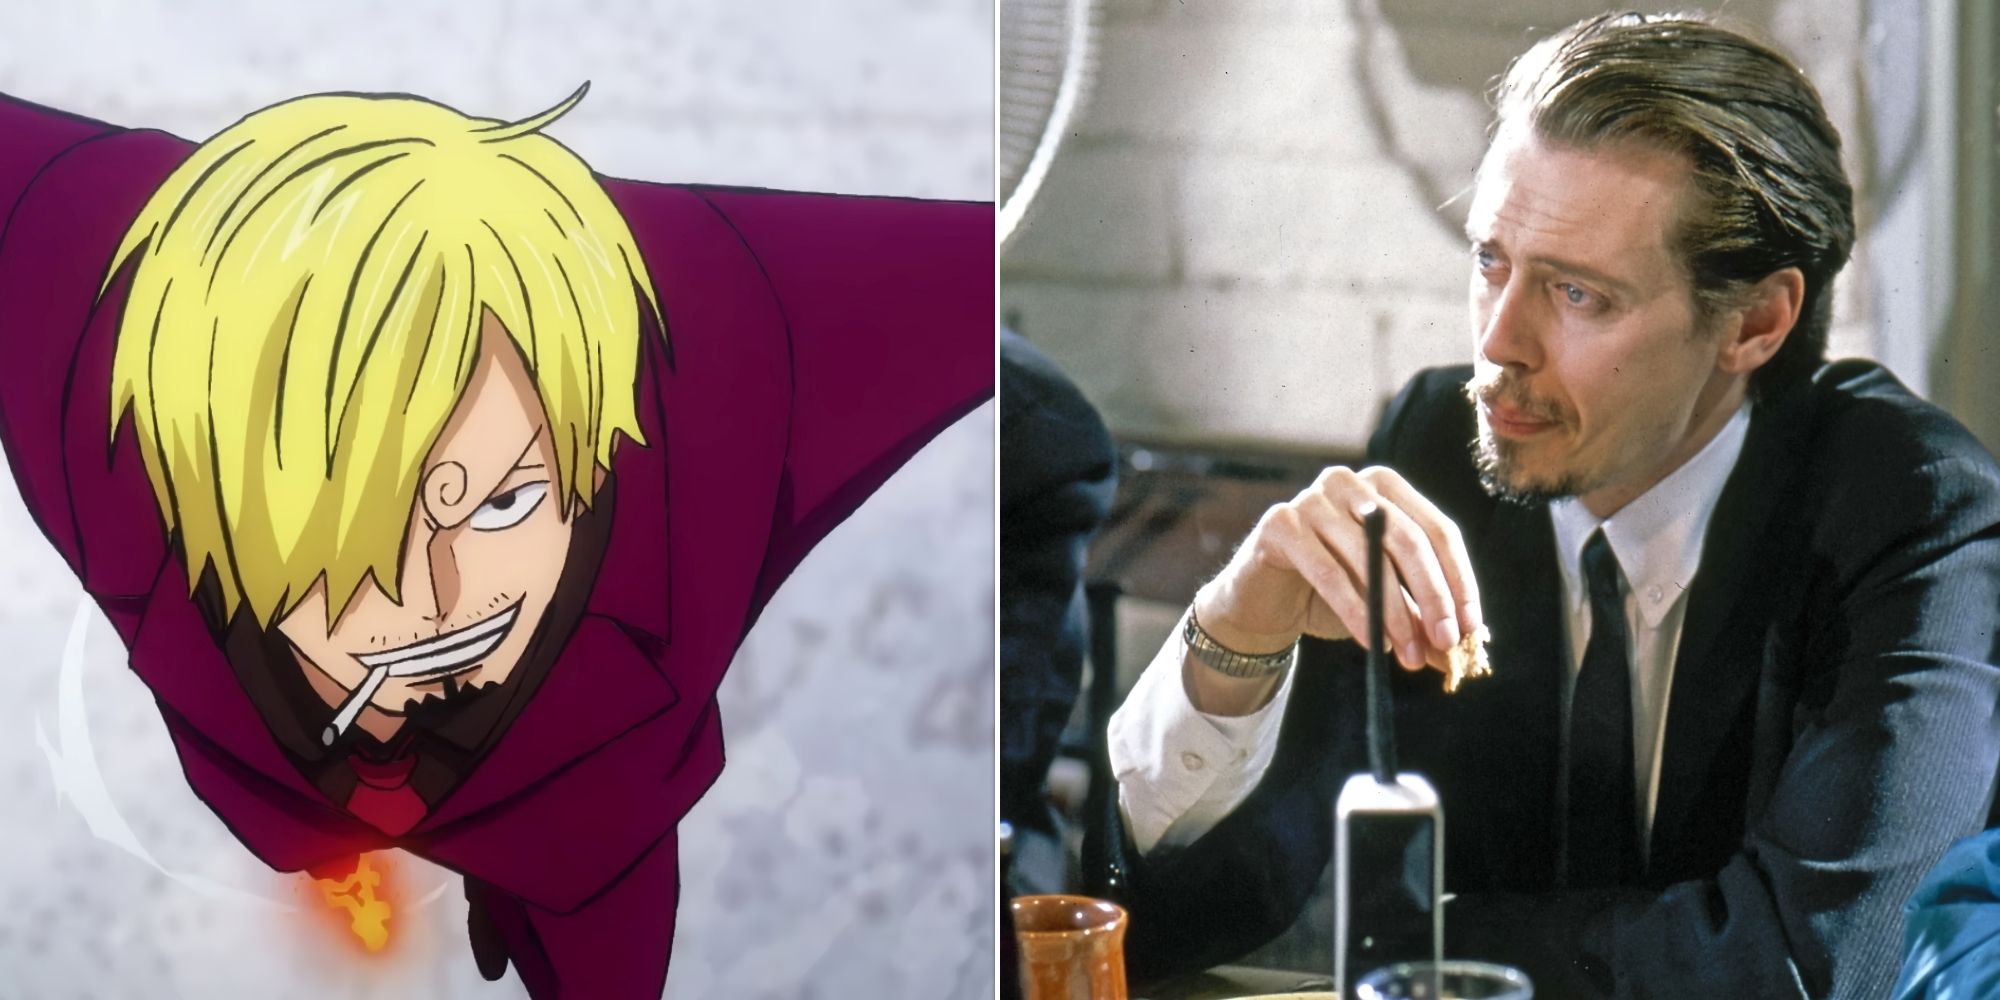 Sanji in his red suit and Mr. Pink as seen in the movie